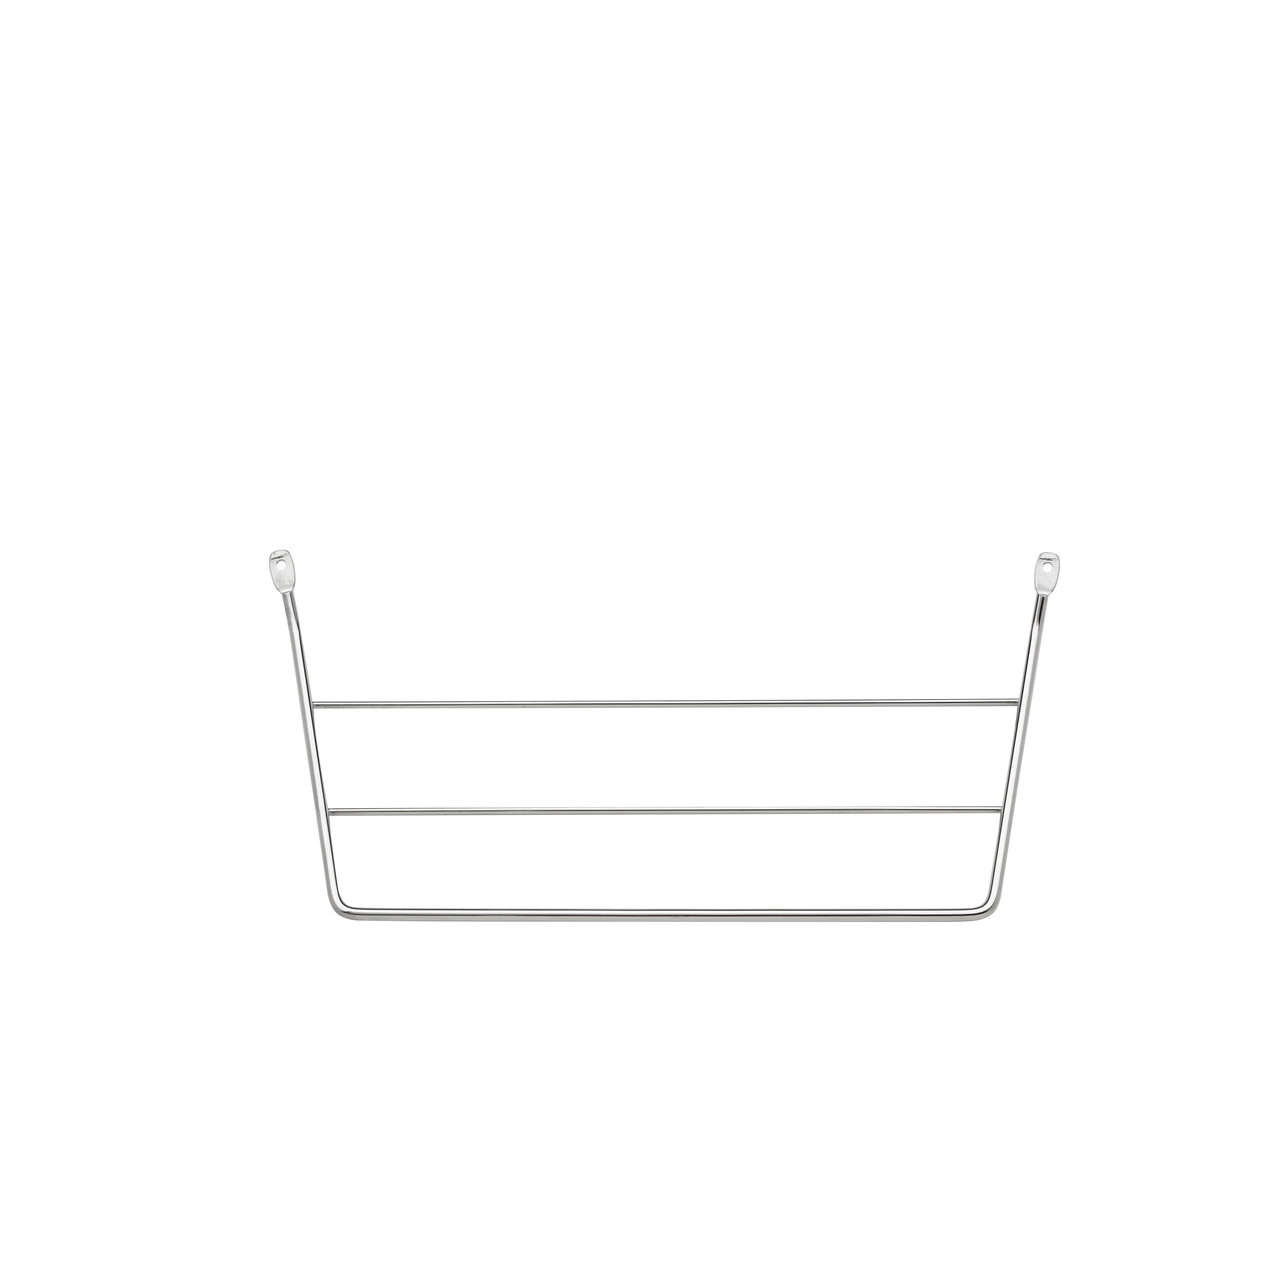 Rev-A-Shelf 563-47 3-Prong Towel Bar Pull Out - White